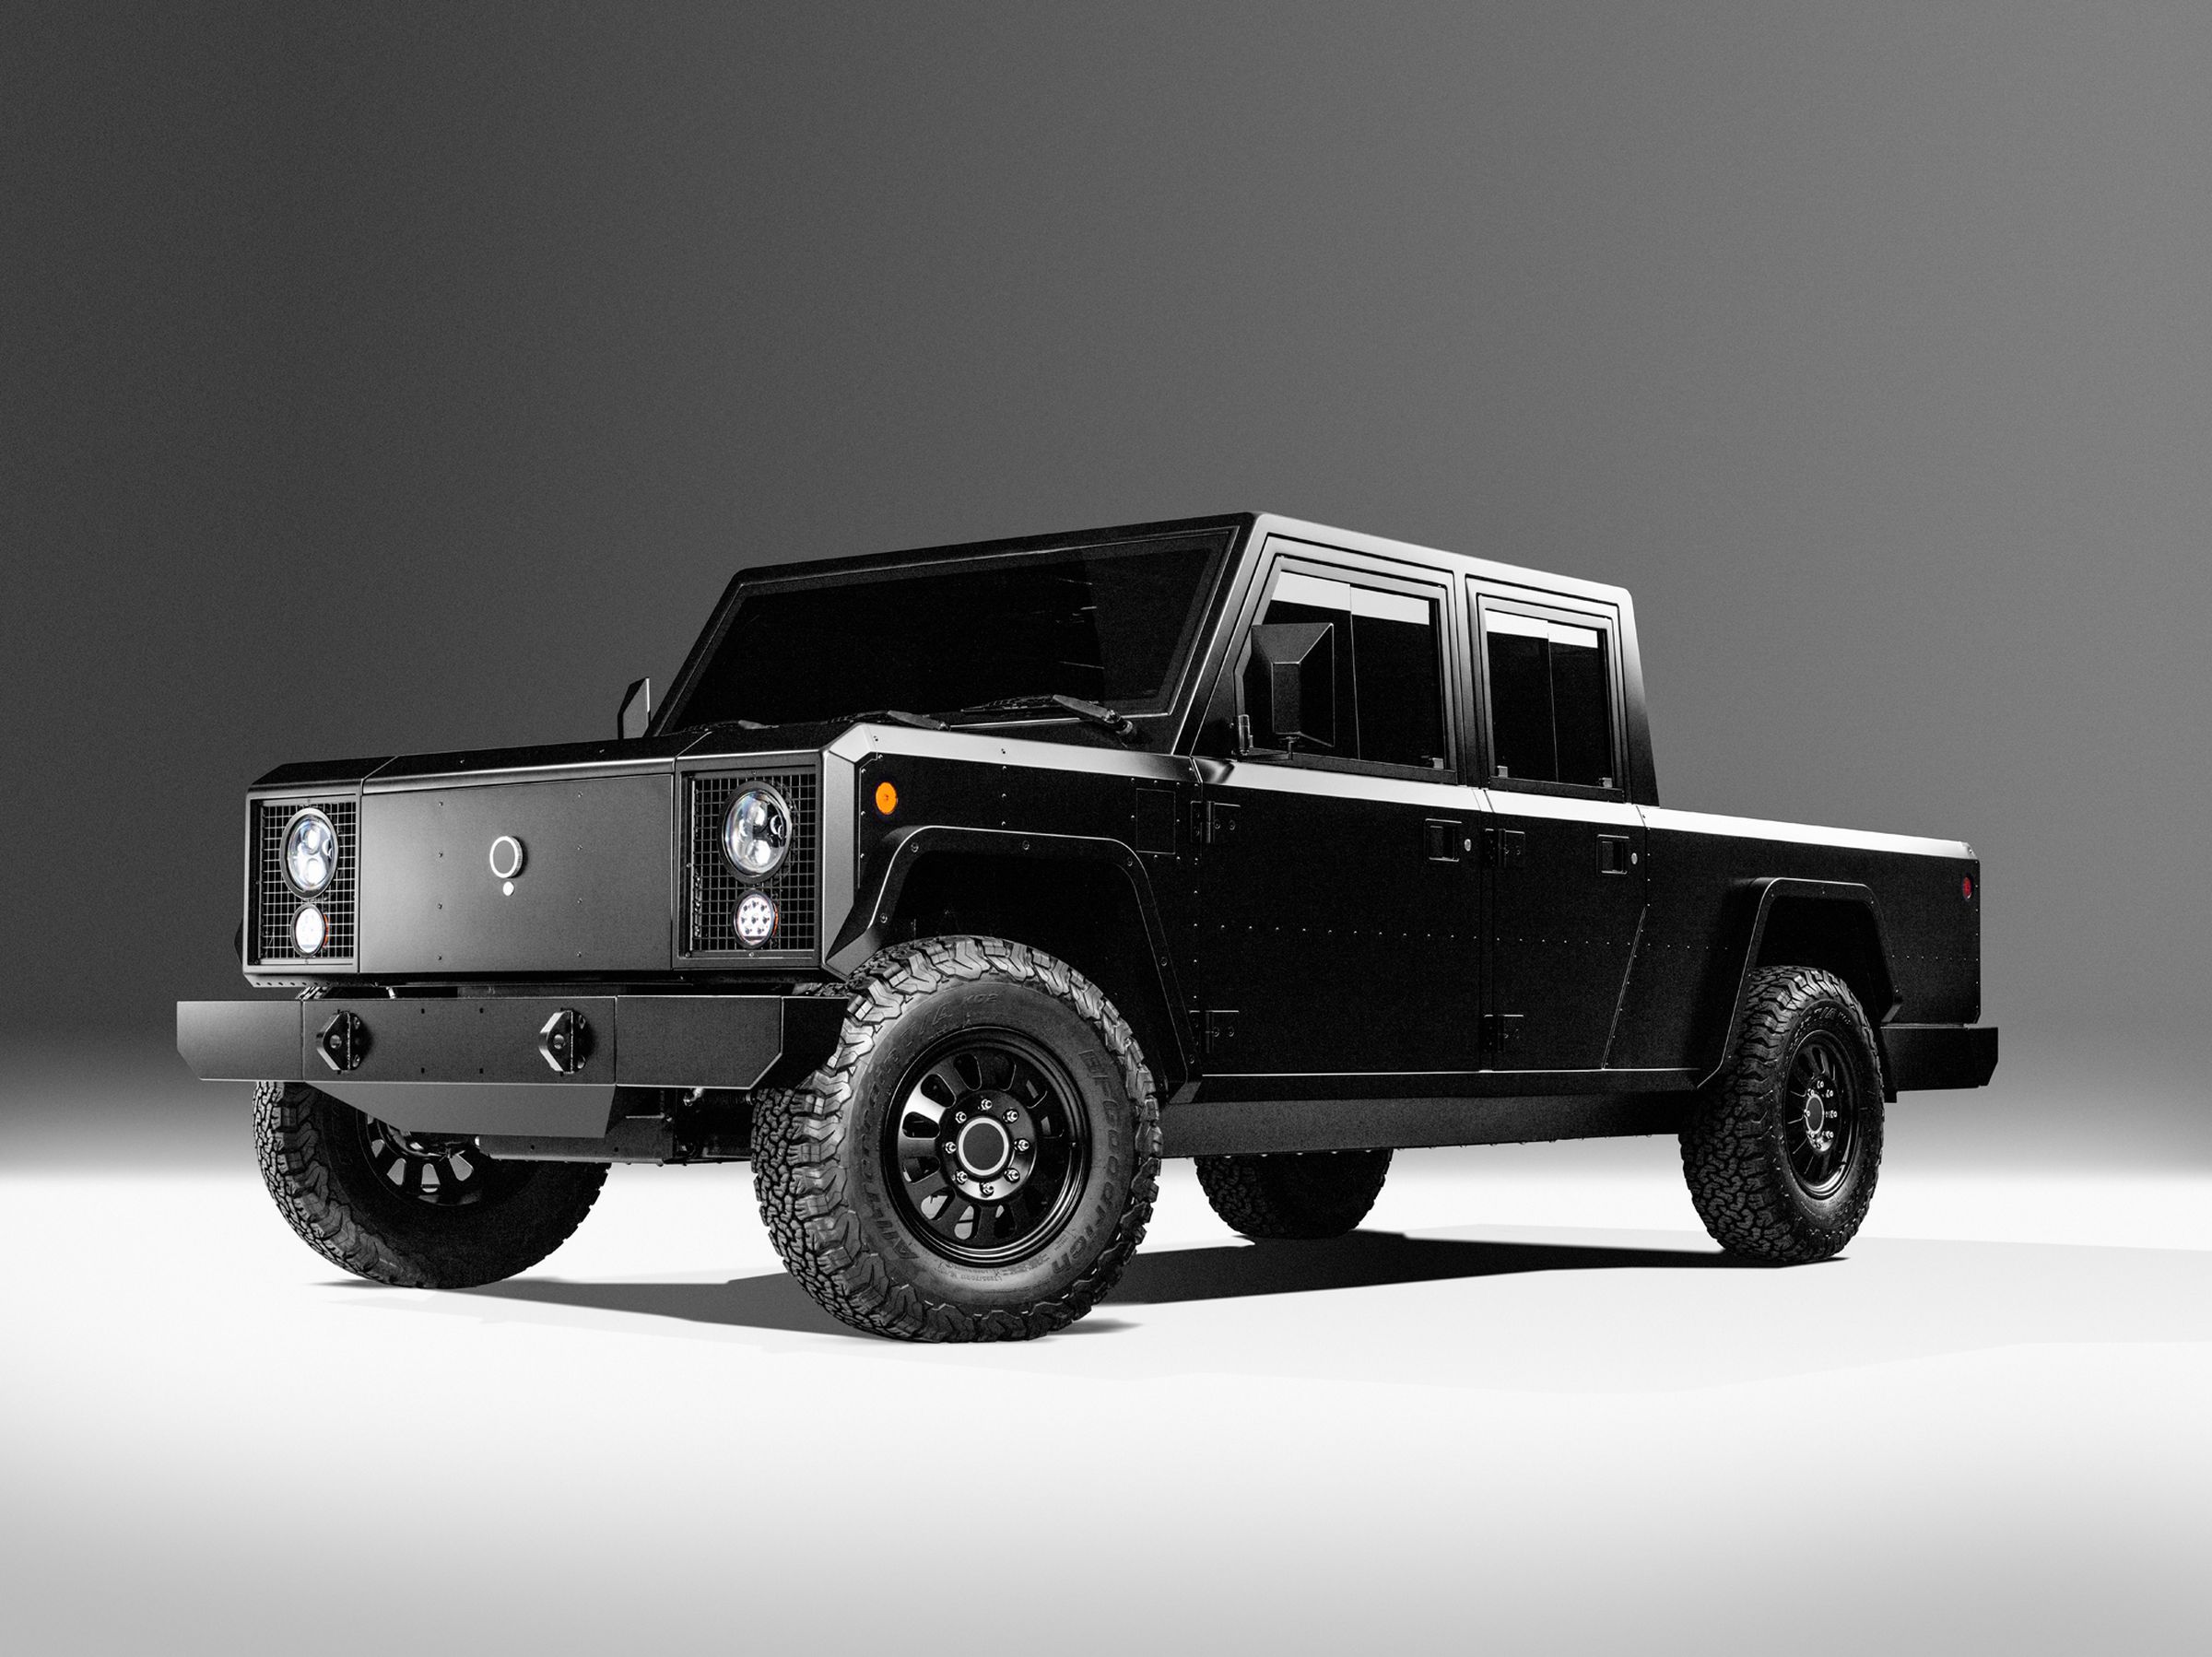 The Bollinger B2 electric truck.